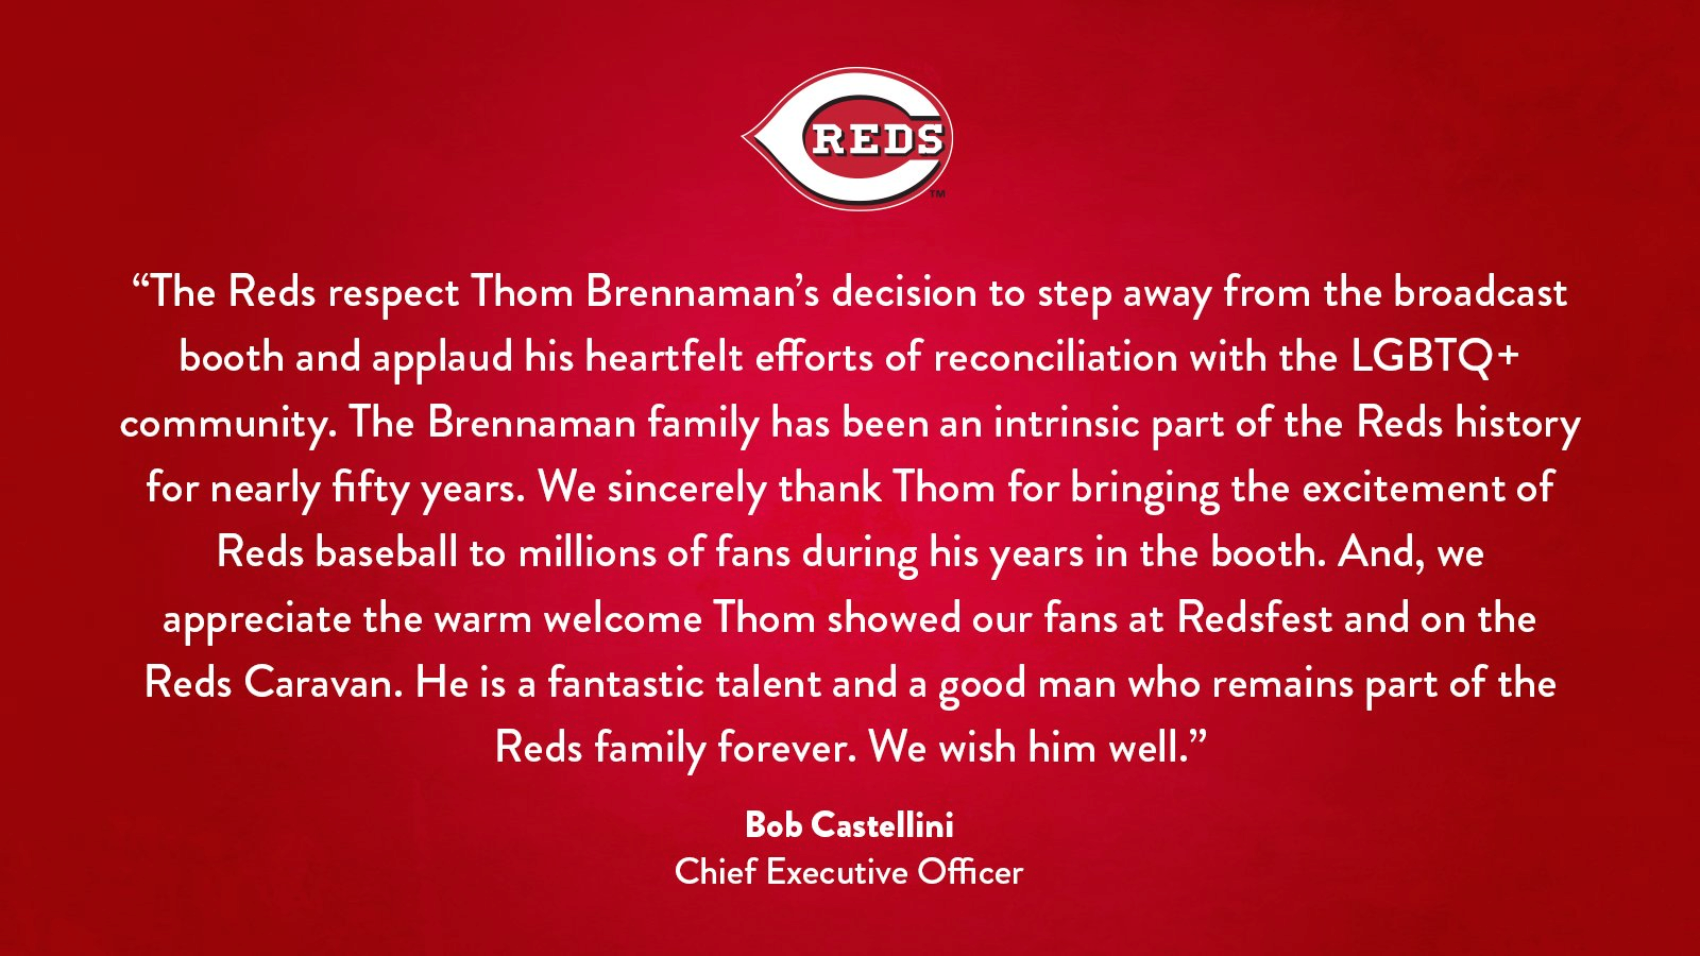 The statement from the Cincinnati Reds acknowledging Brennaman's resignation and calling him "a good man."